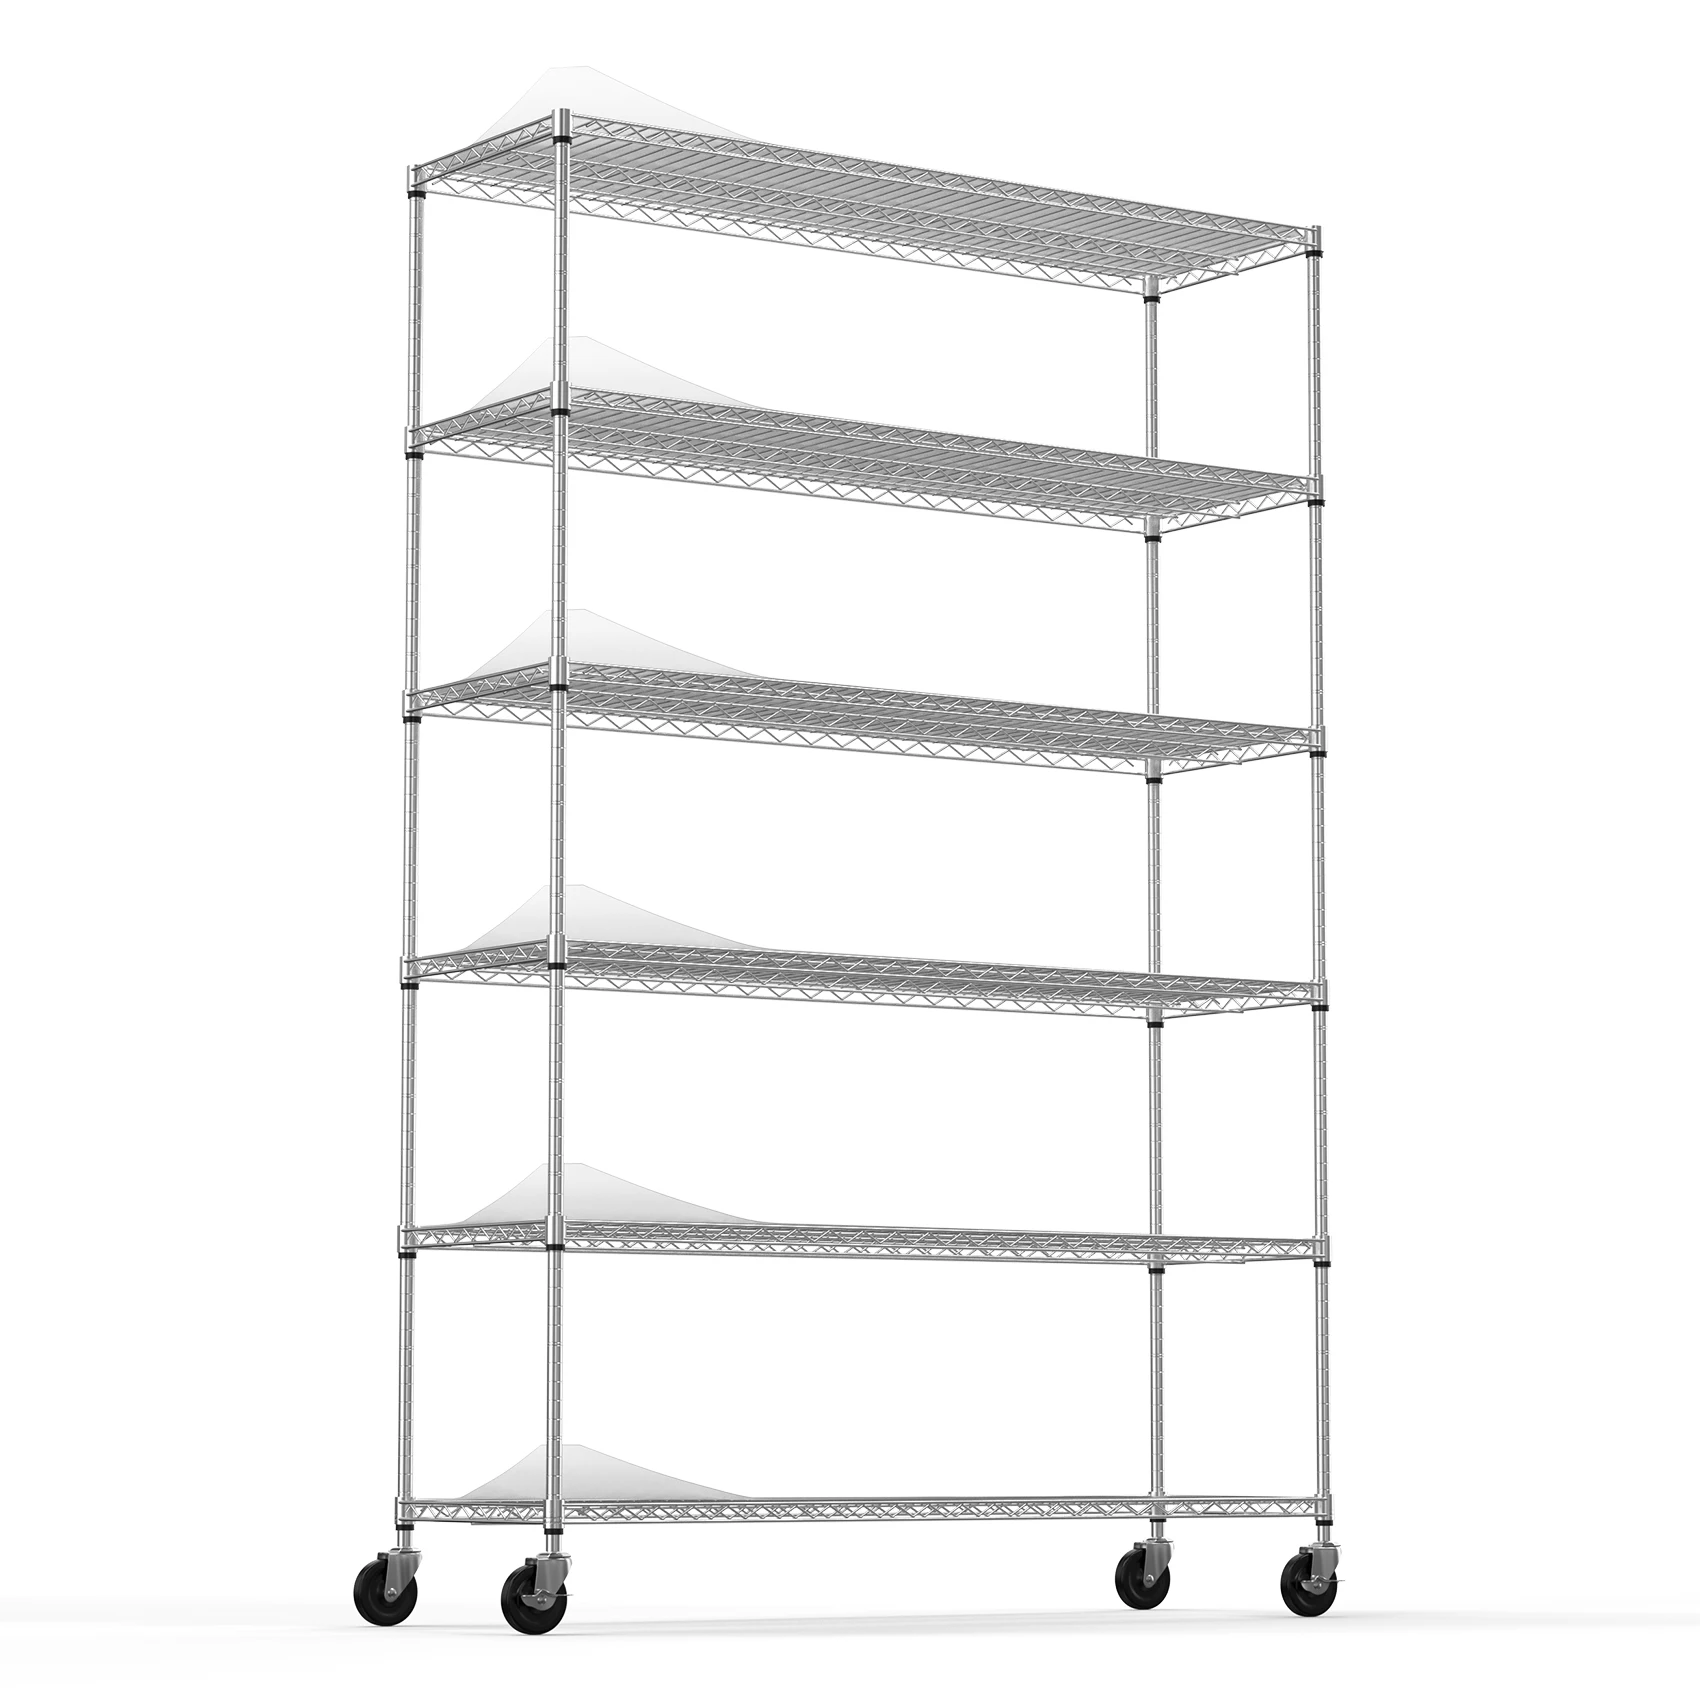 

6 Tier Wire Shelving Unit 6000 LBS NSF Height Adjustable Metal Garage Storage Shelves with Wheels Heavy Duty Storage Wire Rack